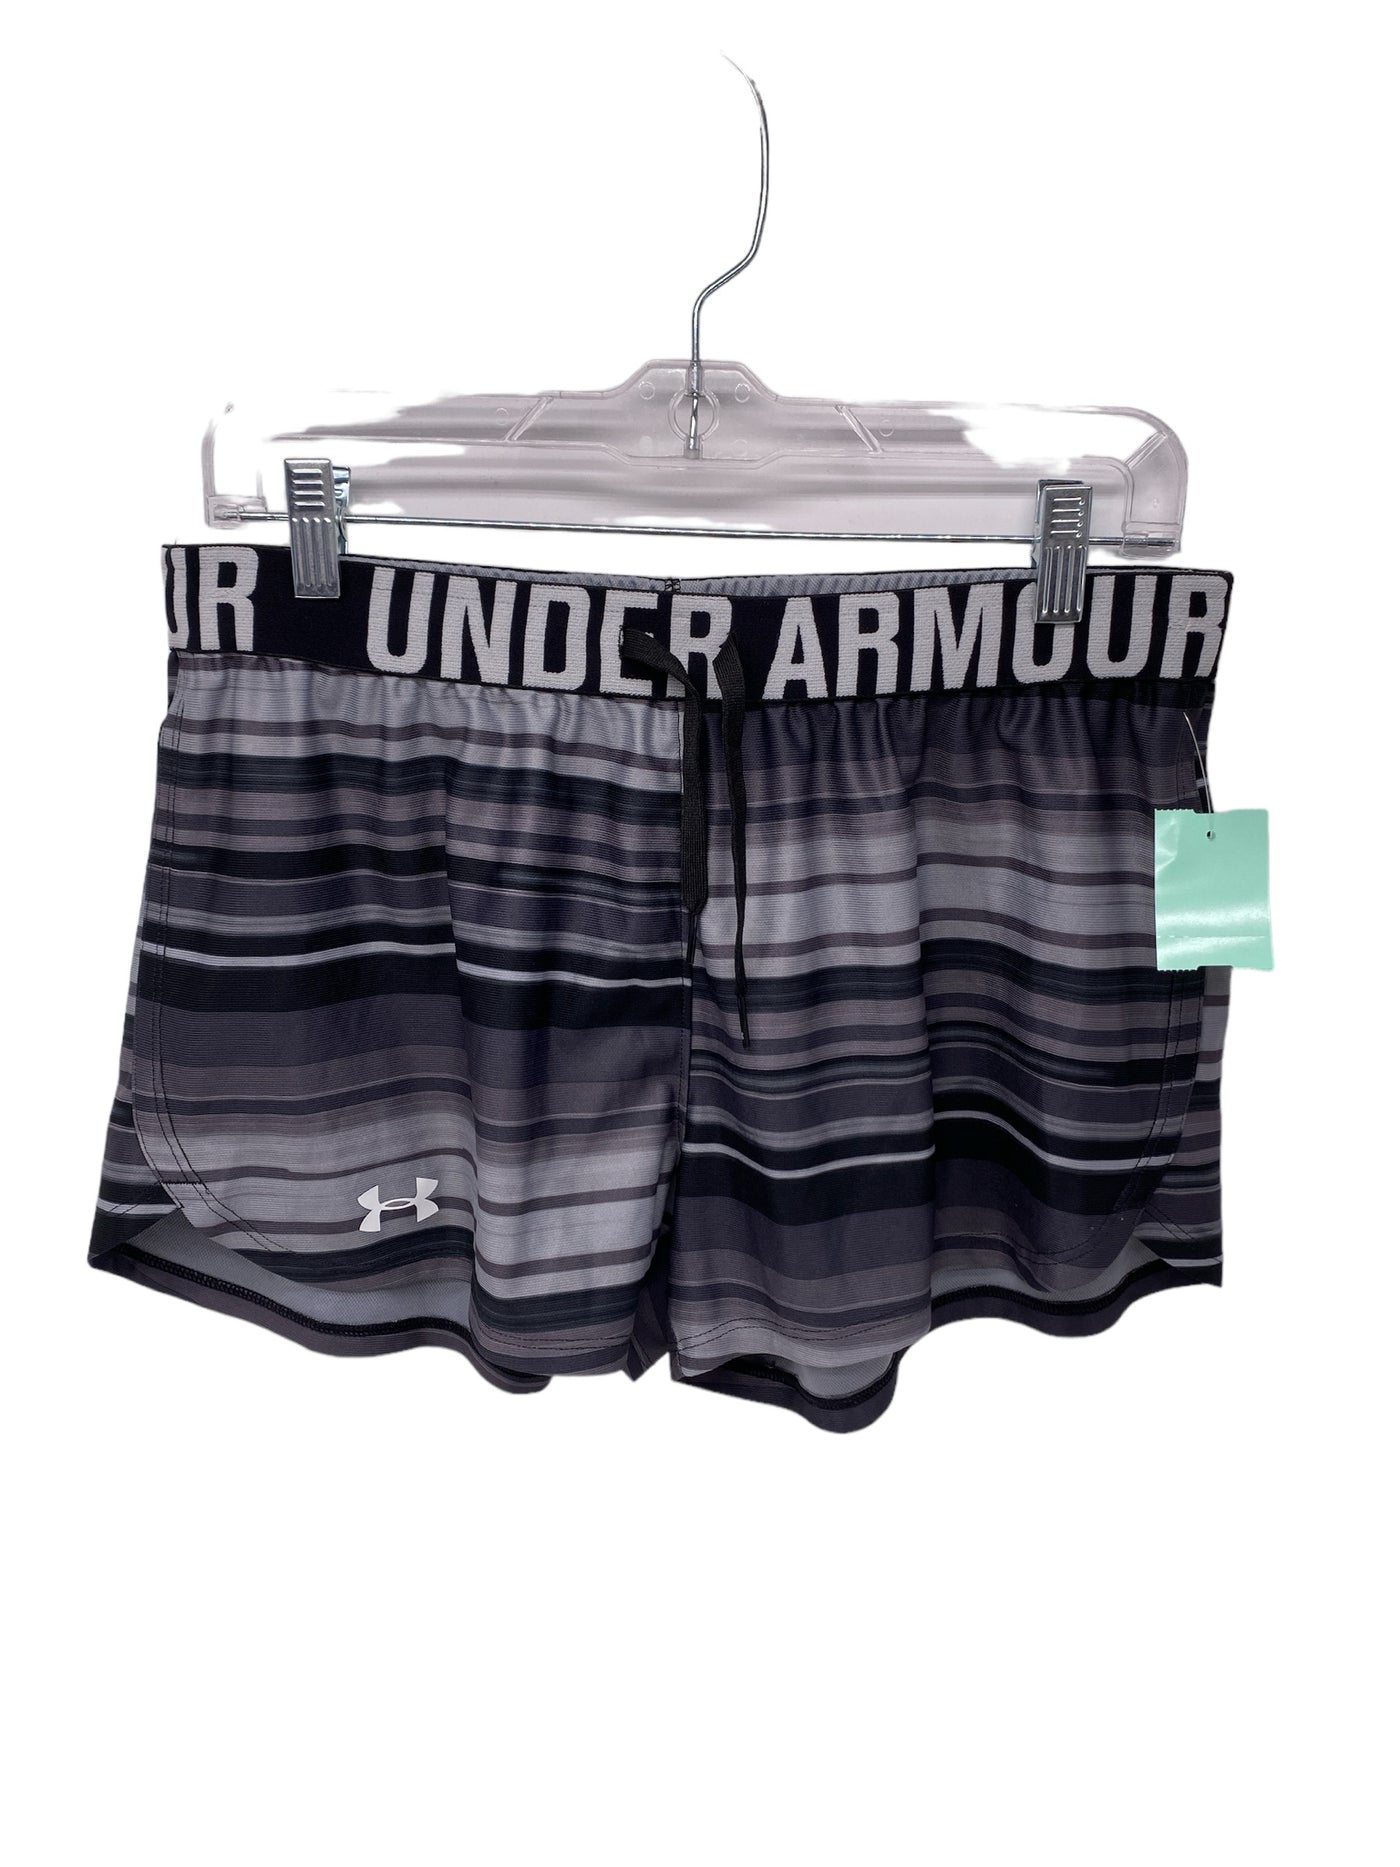 Under Armour Misses Size S/M Grey Print Athleisure Shorts